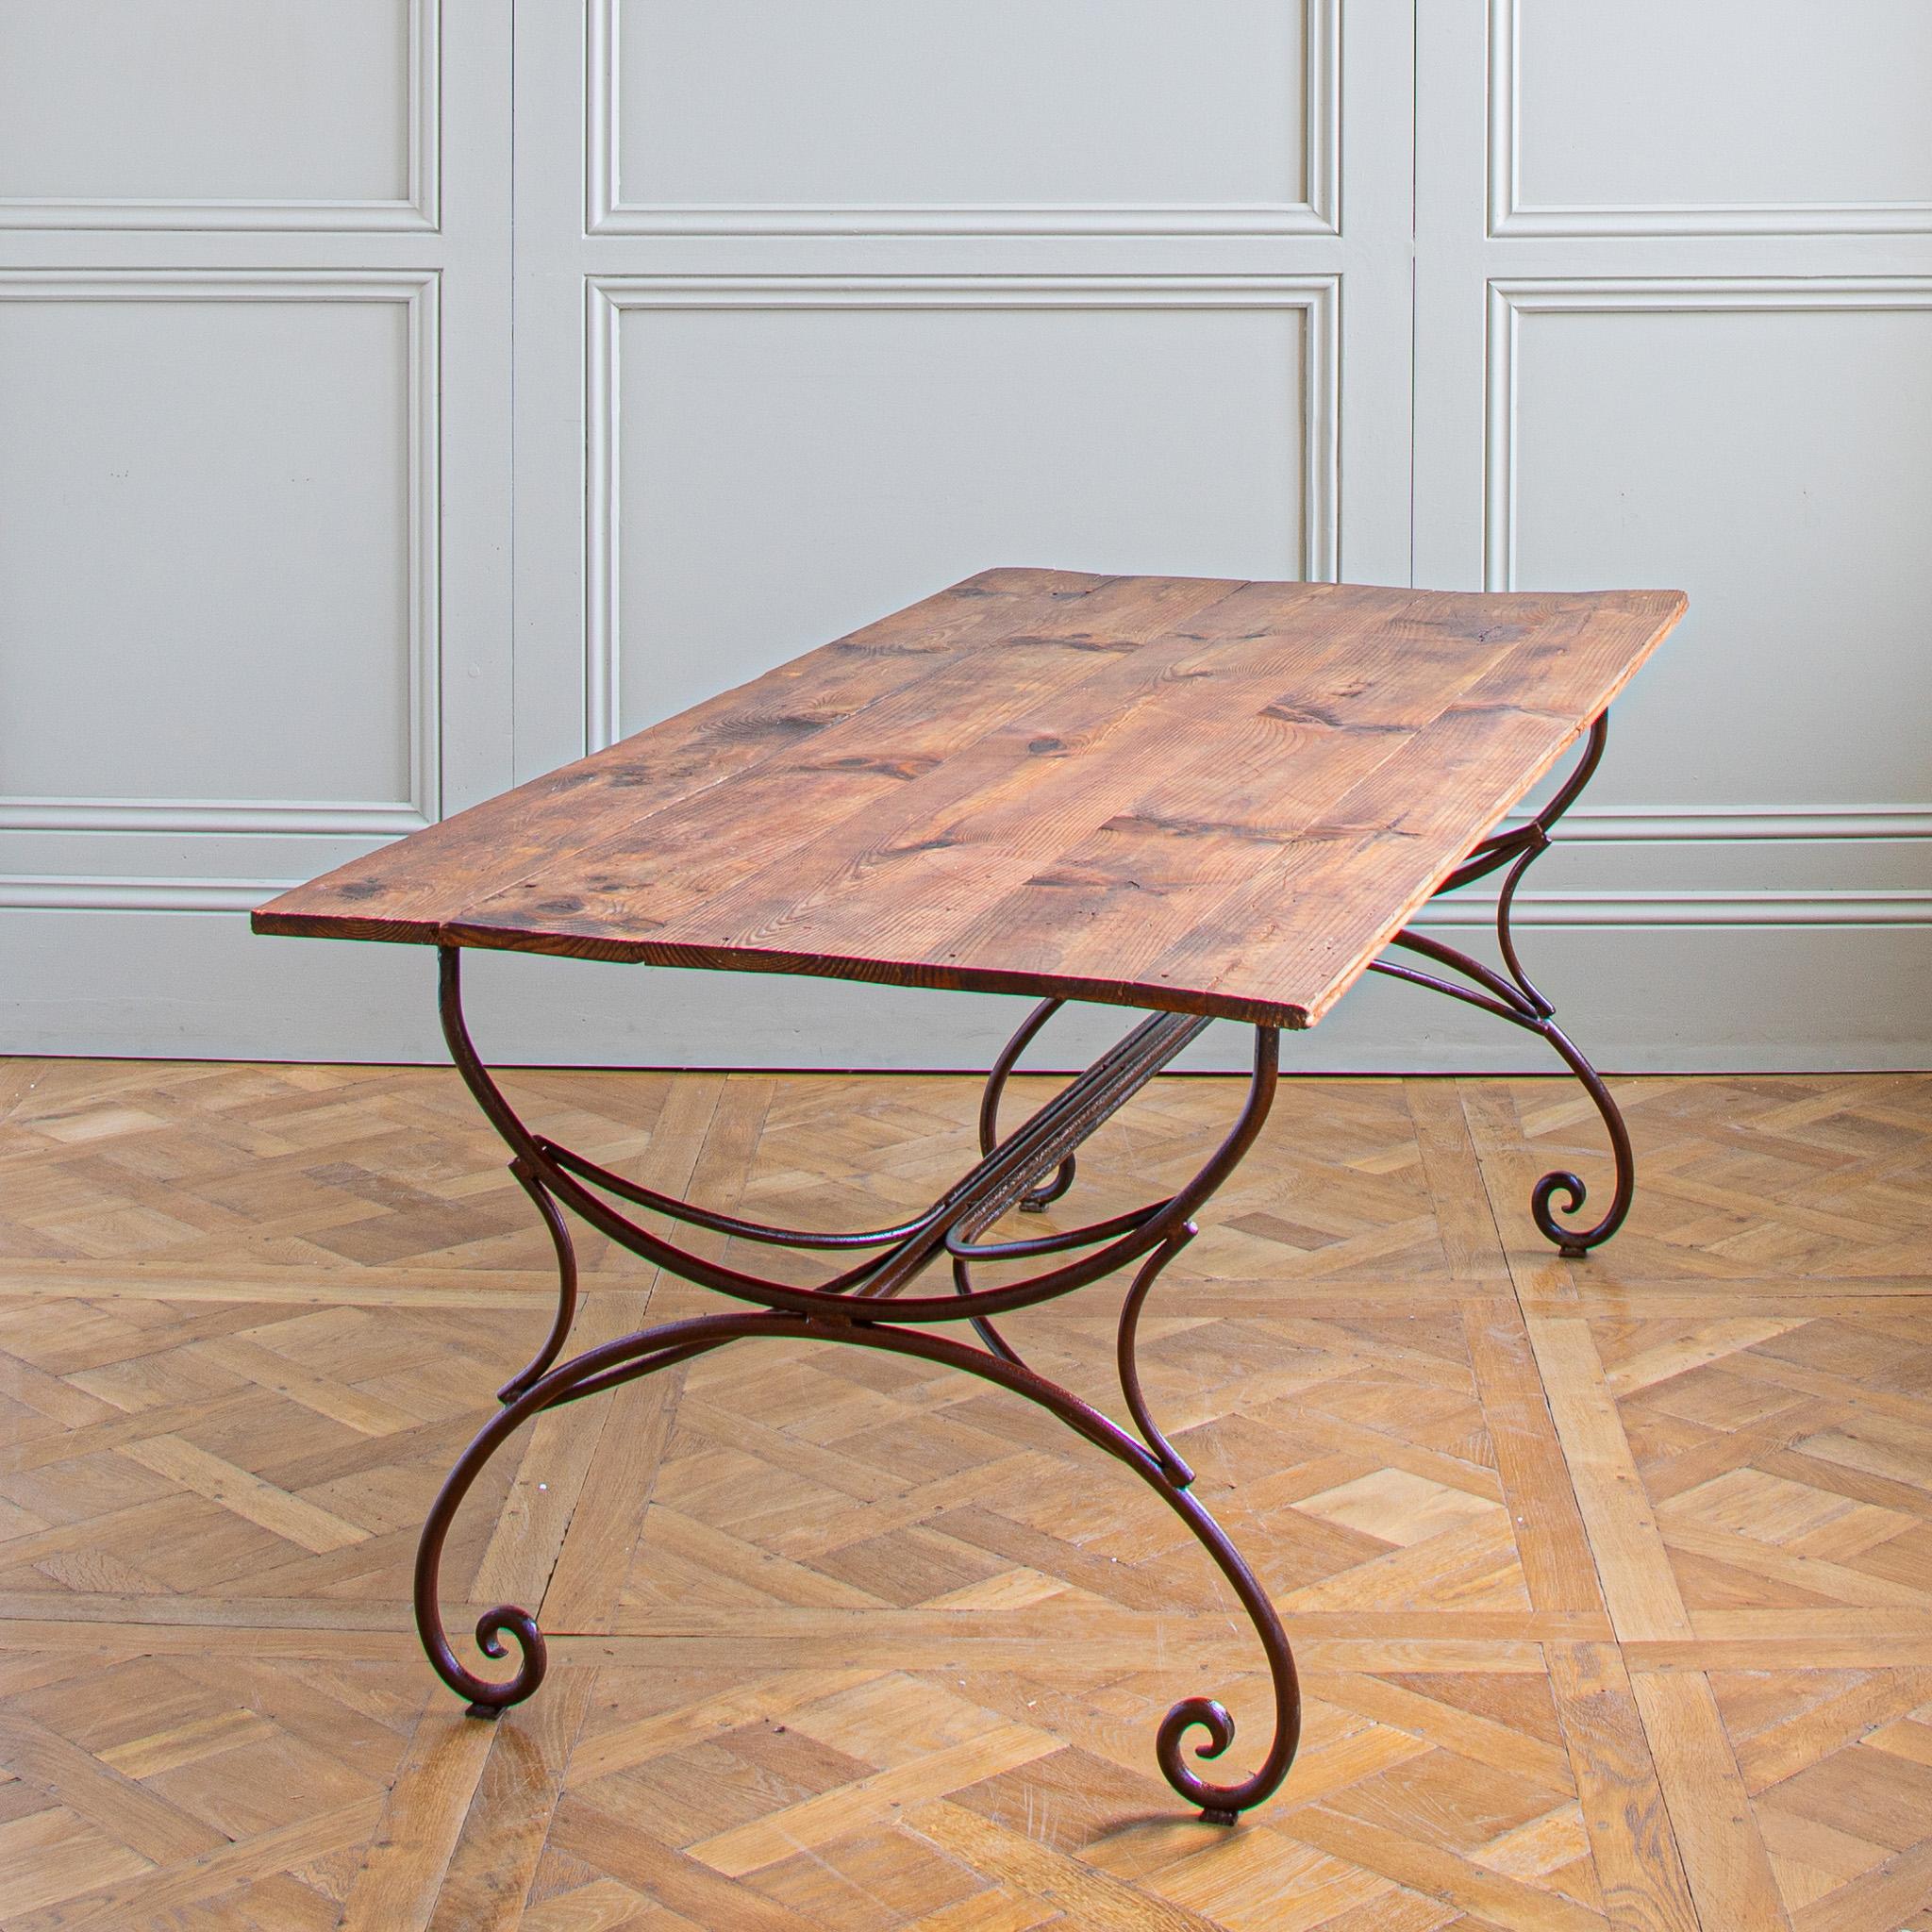 Large French Rustic Wrought Iron Dining Or Garden Table In Good Condition For Sale In London, Park Royal